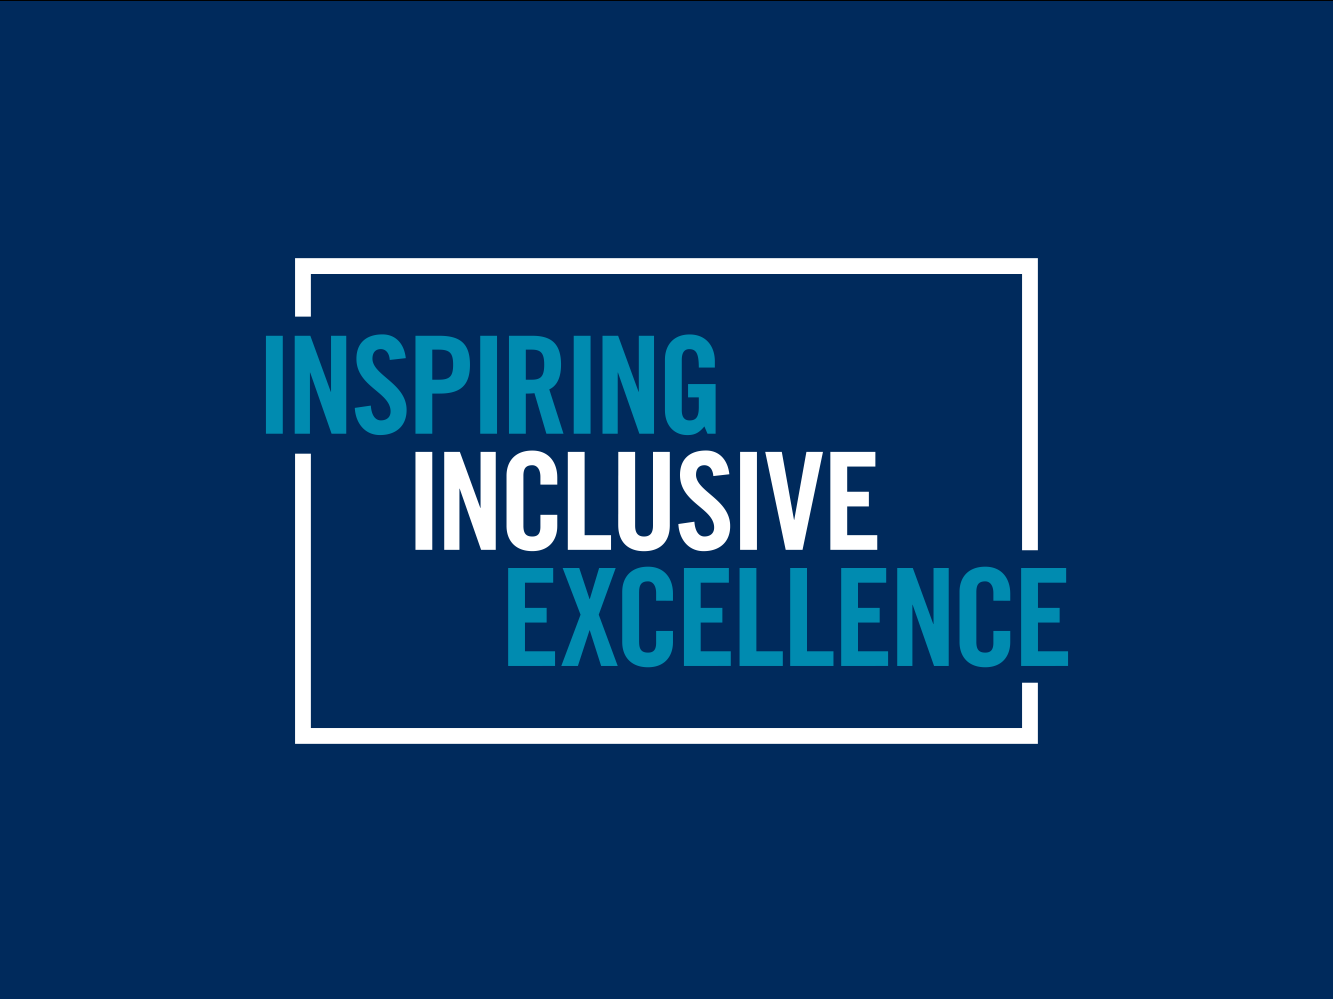 A plain blue background with blue and white text reading "INSPIRING INCLUSIVE EXCELLENCE."